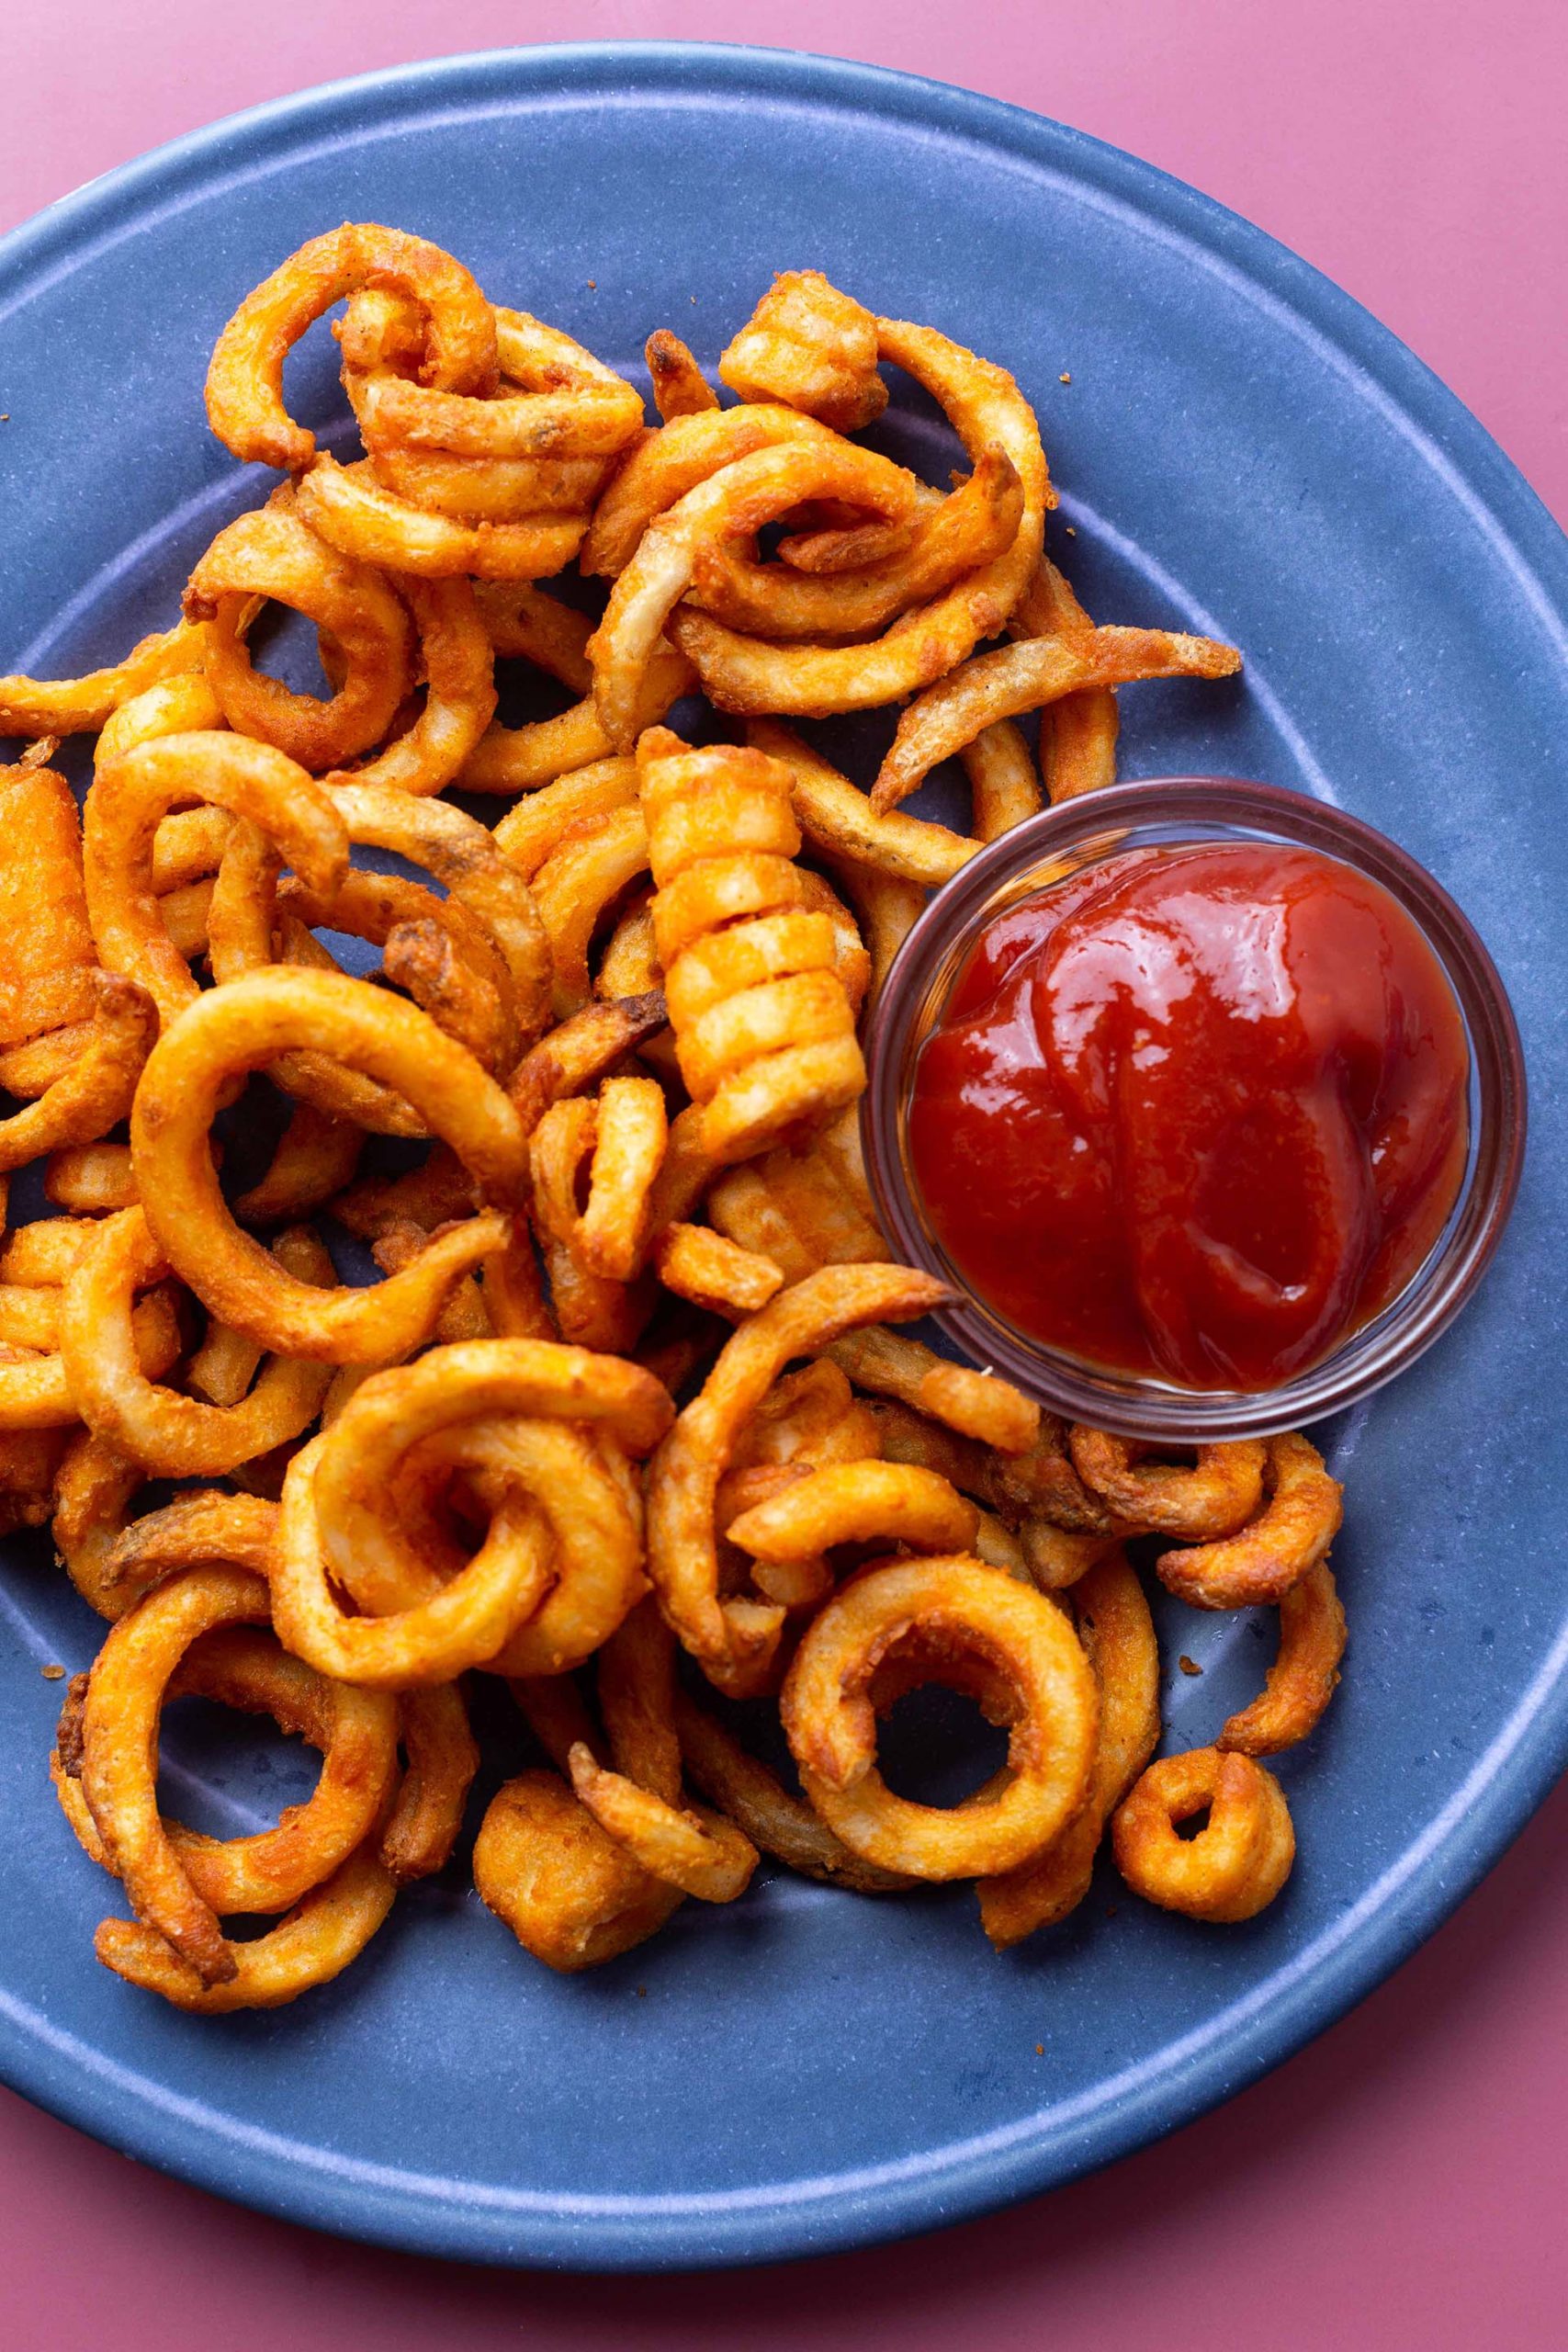 Arby’s Curly Fries | Air Fryer Frozen Fries recipe - Chili in a pod